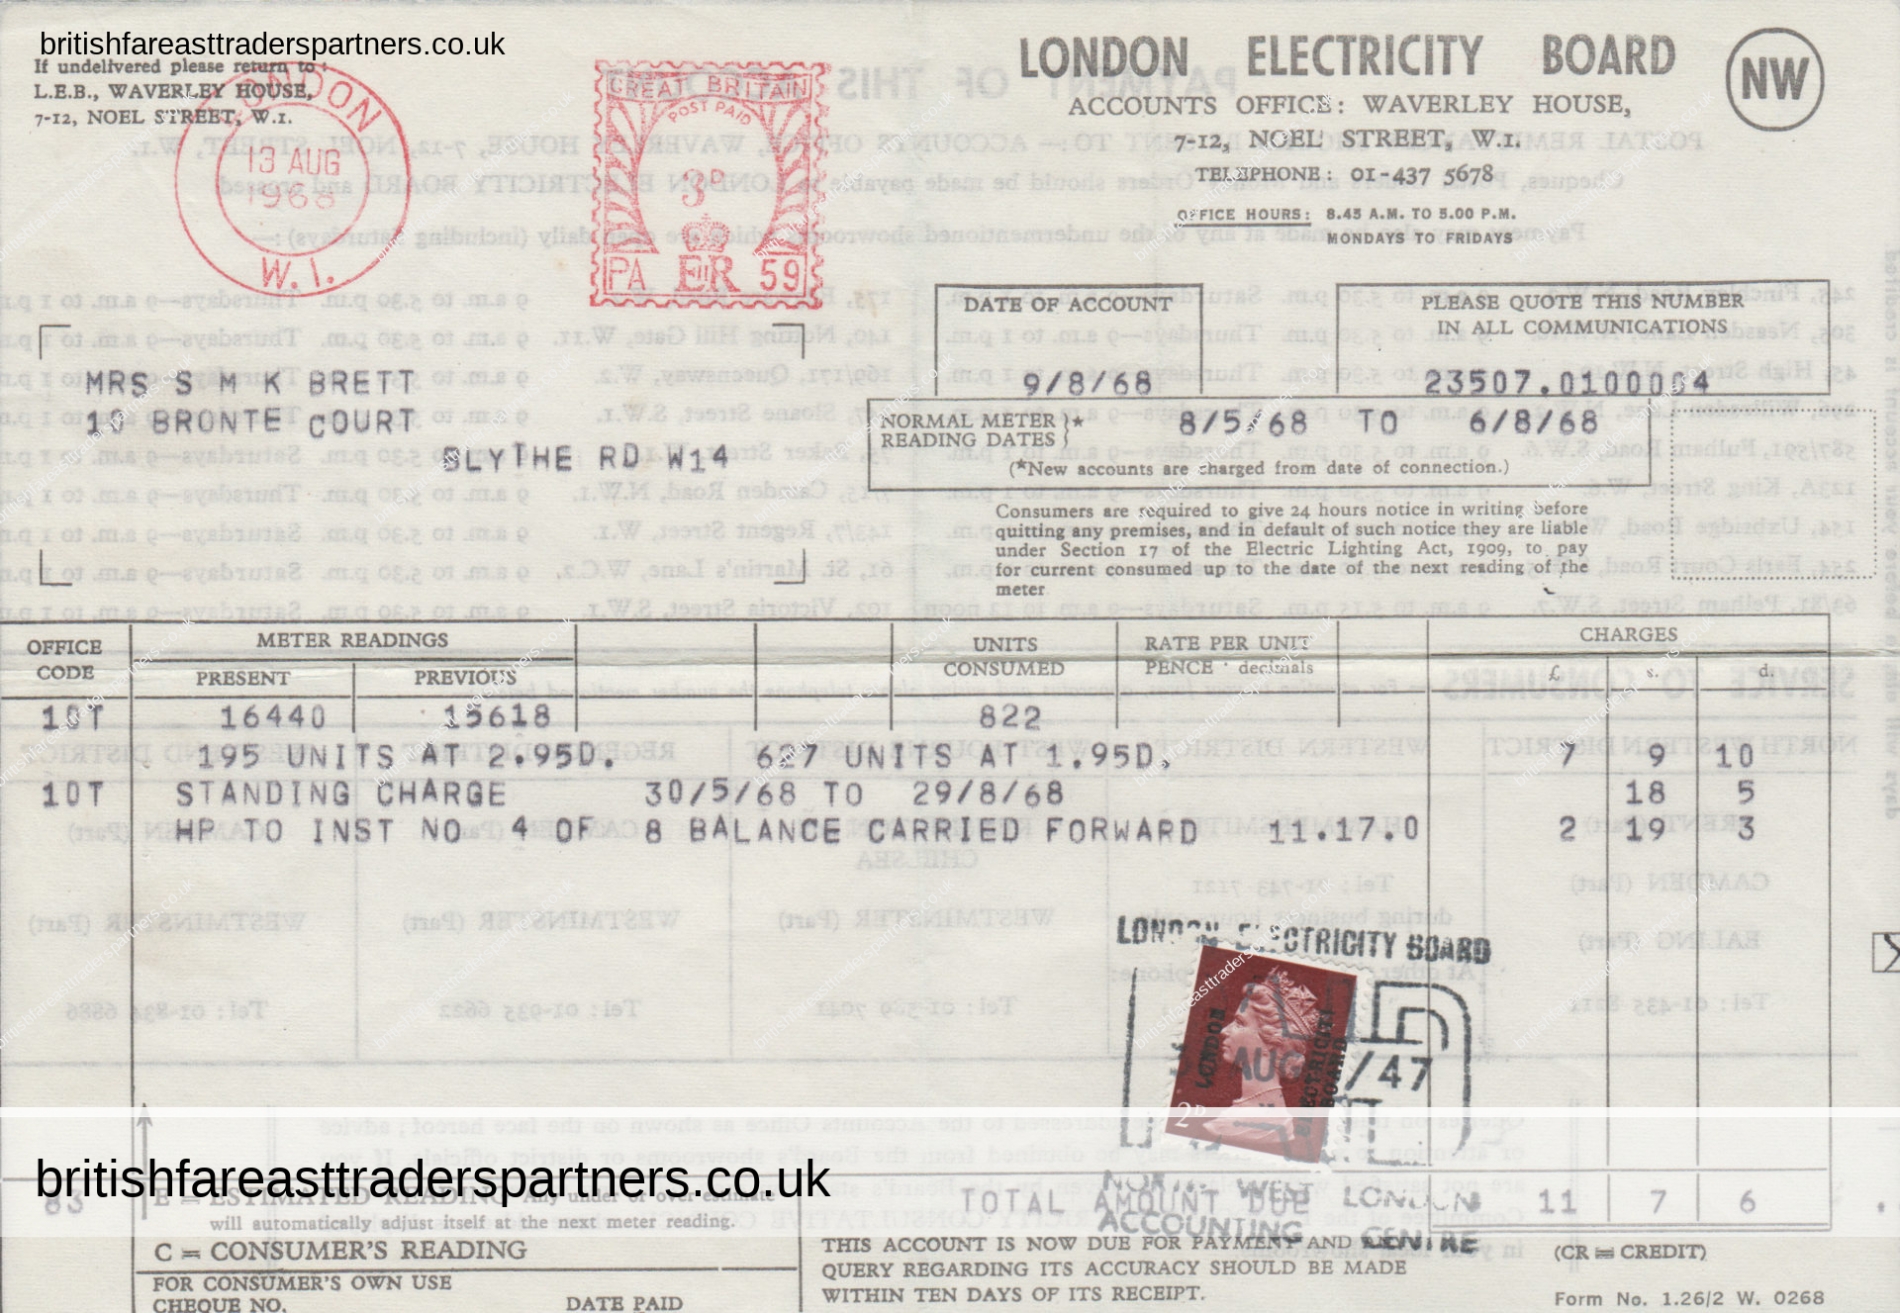 VINTAGE 1968 INVOICE / BILLHEAD “LONDON ELECTRICITY BOARD” COLLECTABLES | PAPER & EPHEMERA BUSINESS | COMPANIES |  INVESTMENTS | INDUSTRIES | HERITAGE | HISTORY